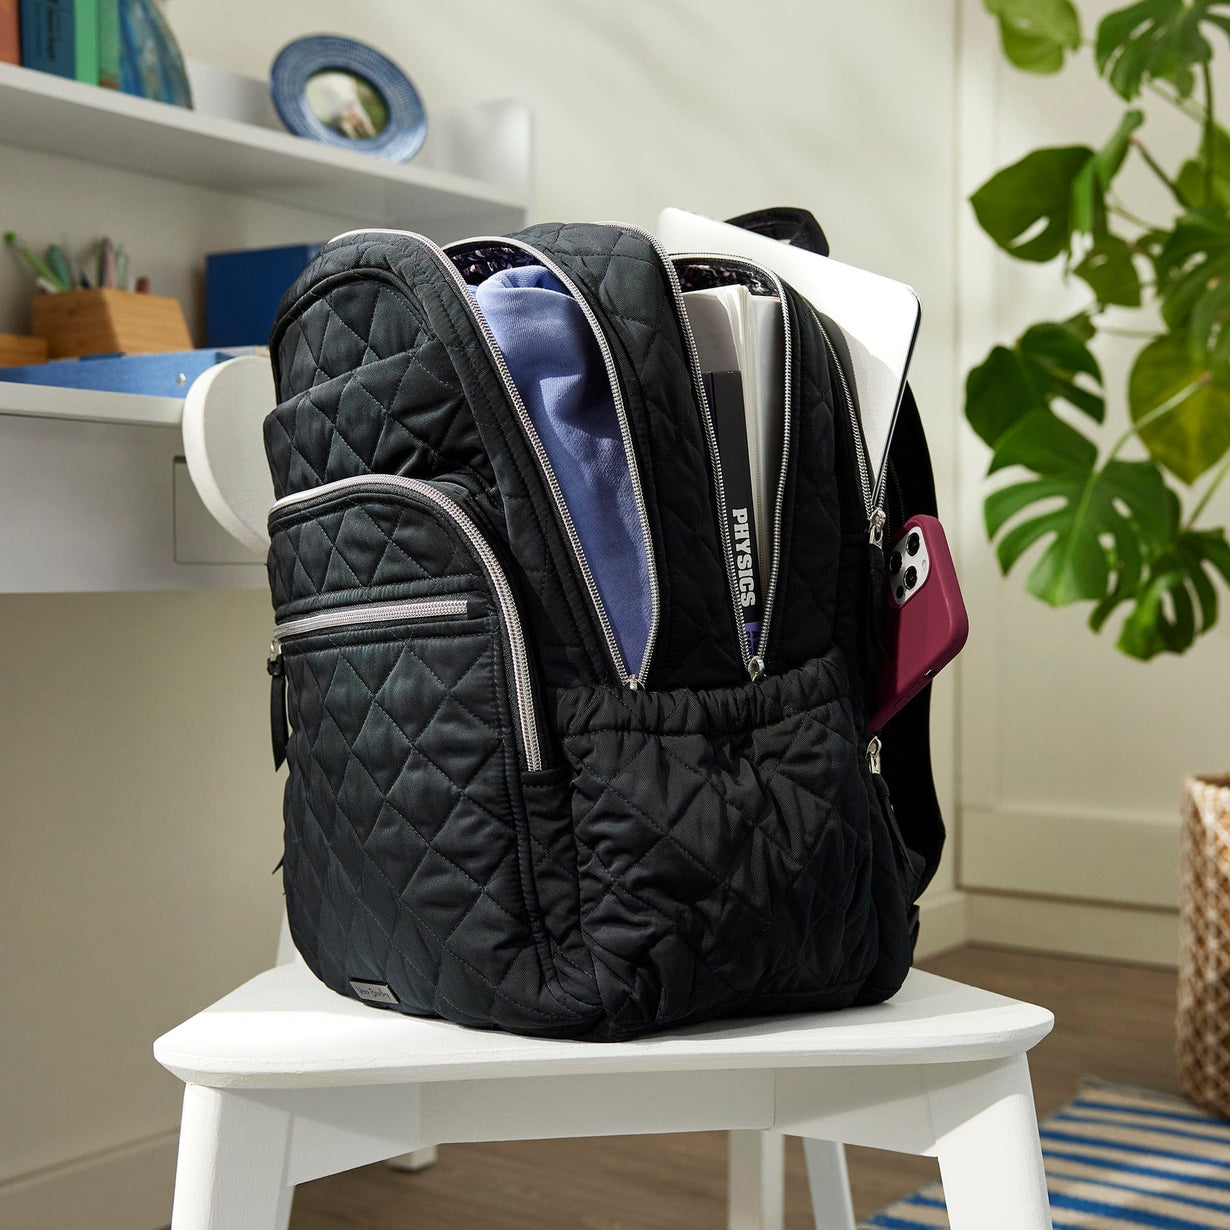 Vera Bradley  Quilted Backpacks, Duffels, Bags & More for Women